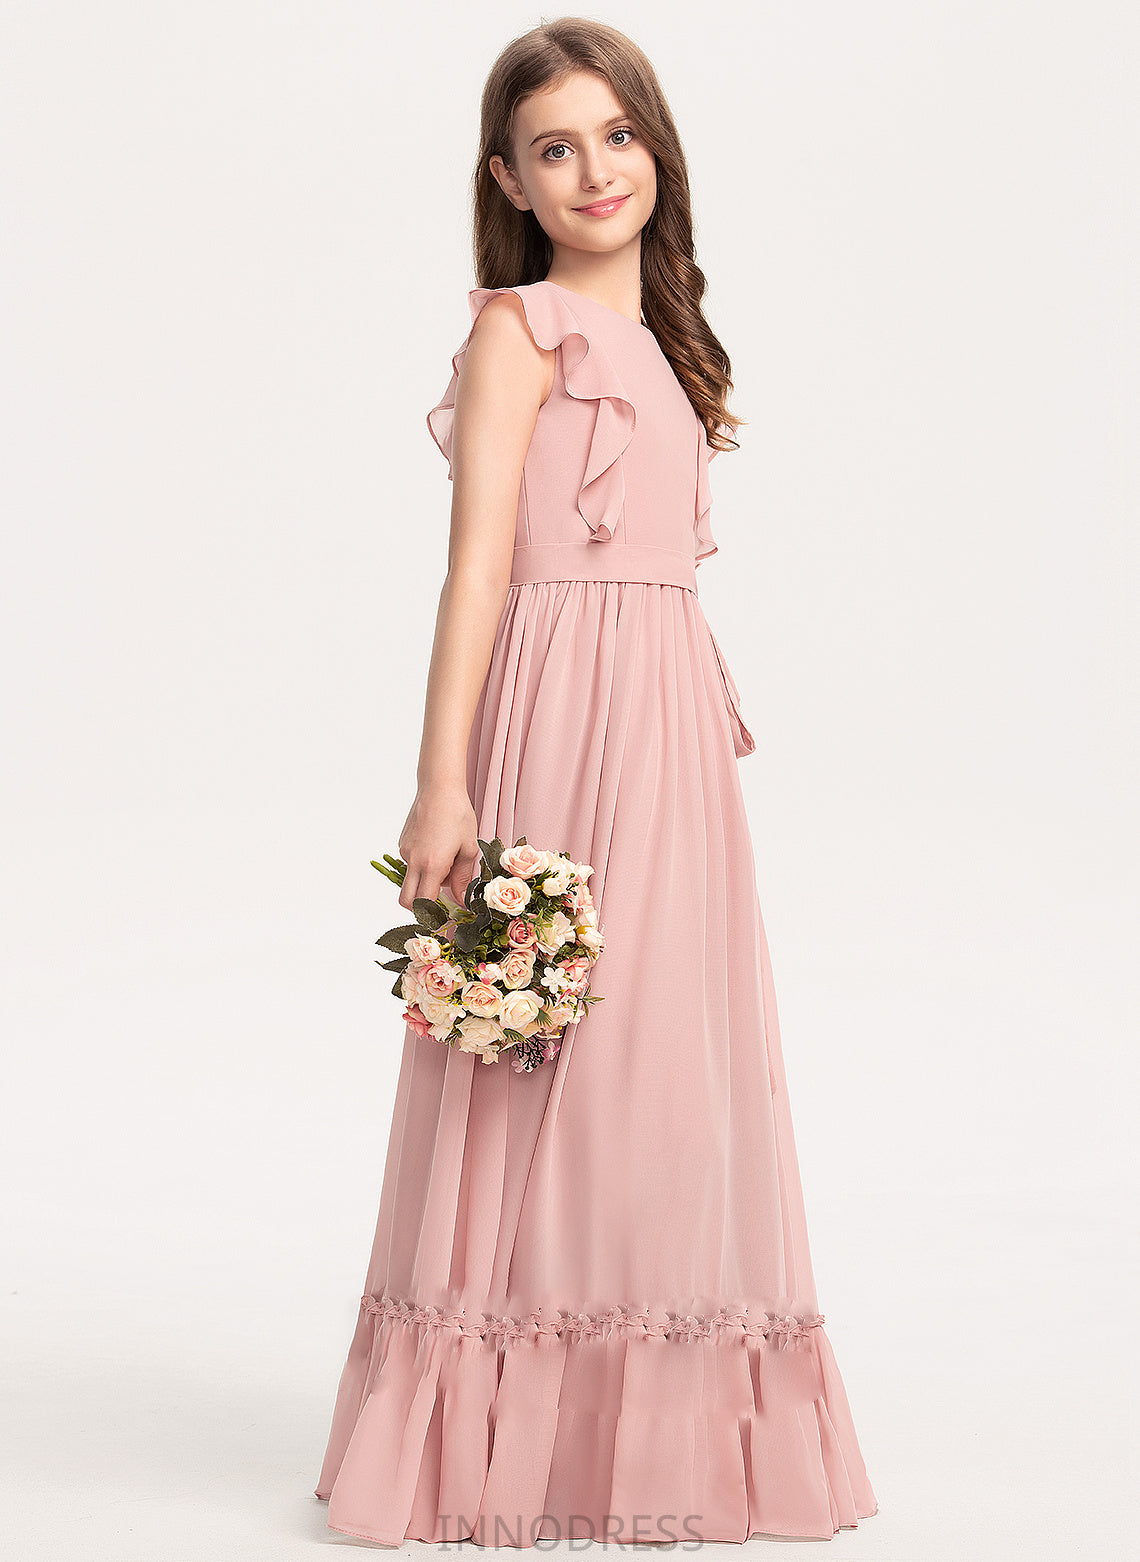 Junior Bridesmaid Dresses With Bow(s) Neck Floor-Length Taliyah Chiffon A-Line Ruffles Scoop Cascading